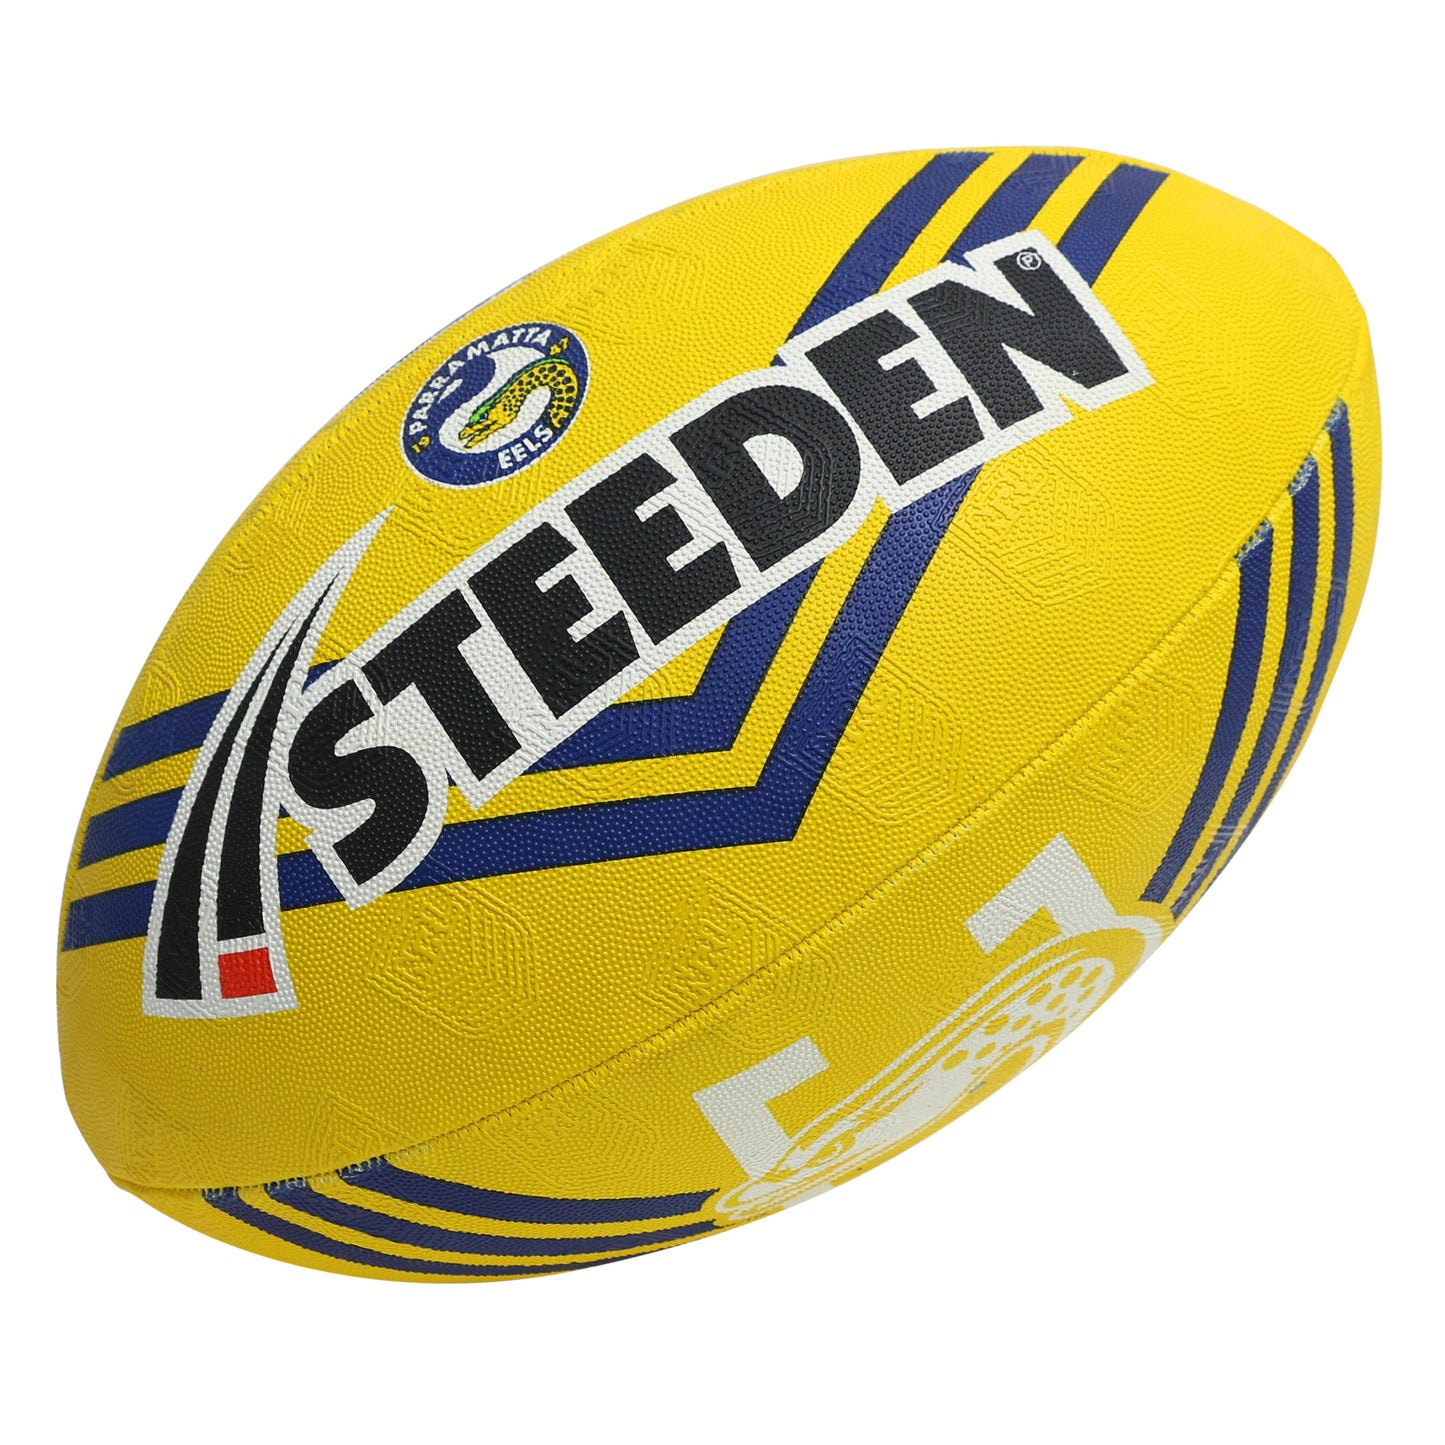 NRL Eels Supporter Ball (11 inch)